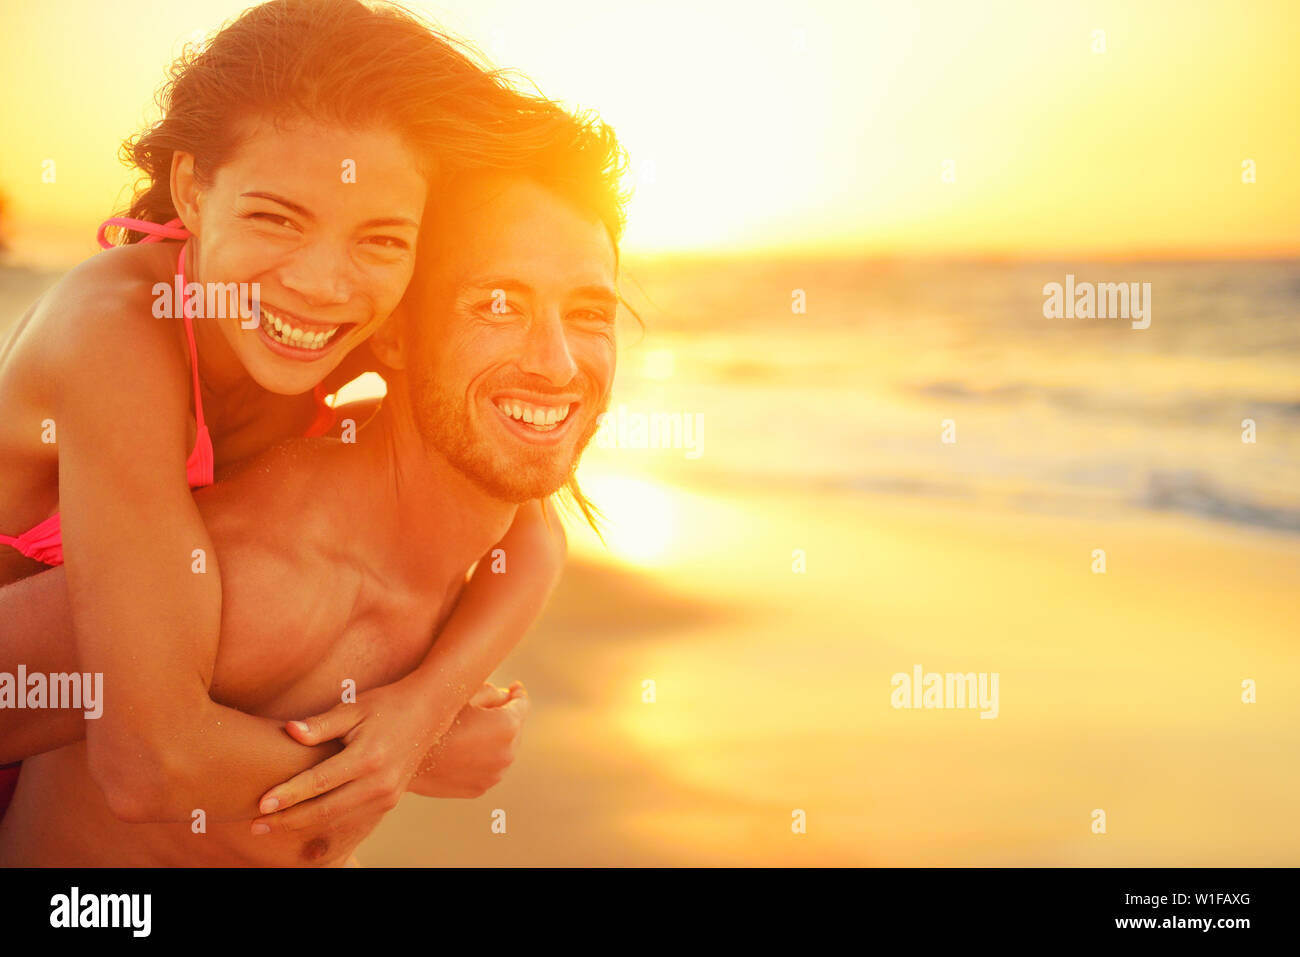 Lovers couple in love having fun dating on beach portrait. Beautiful healthy young adults girlfriend piggybacking on boyfriend hugging happy. Multiracial dating or healthy relationship concept. Stock Photo